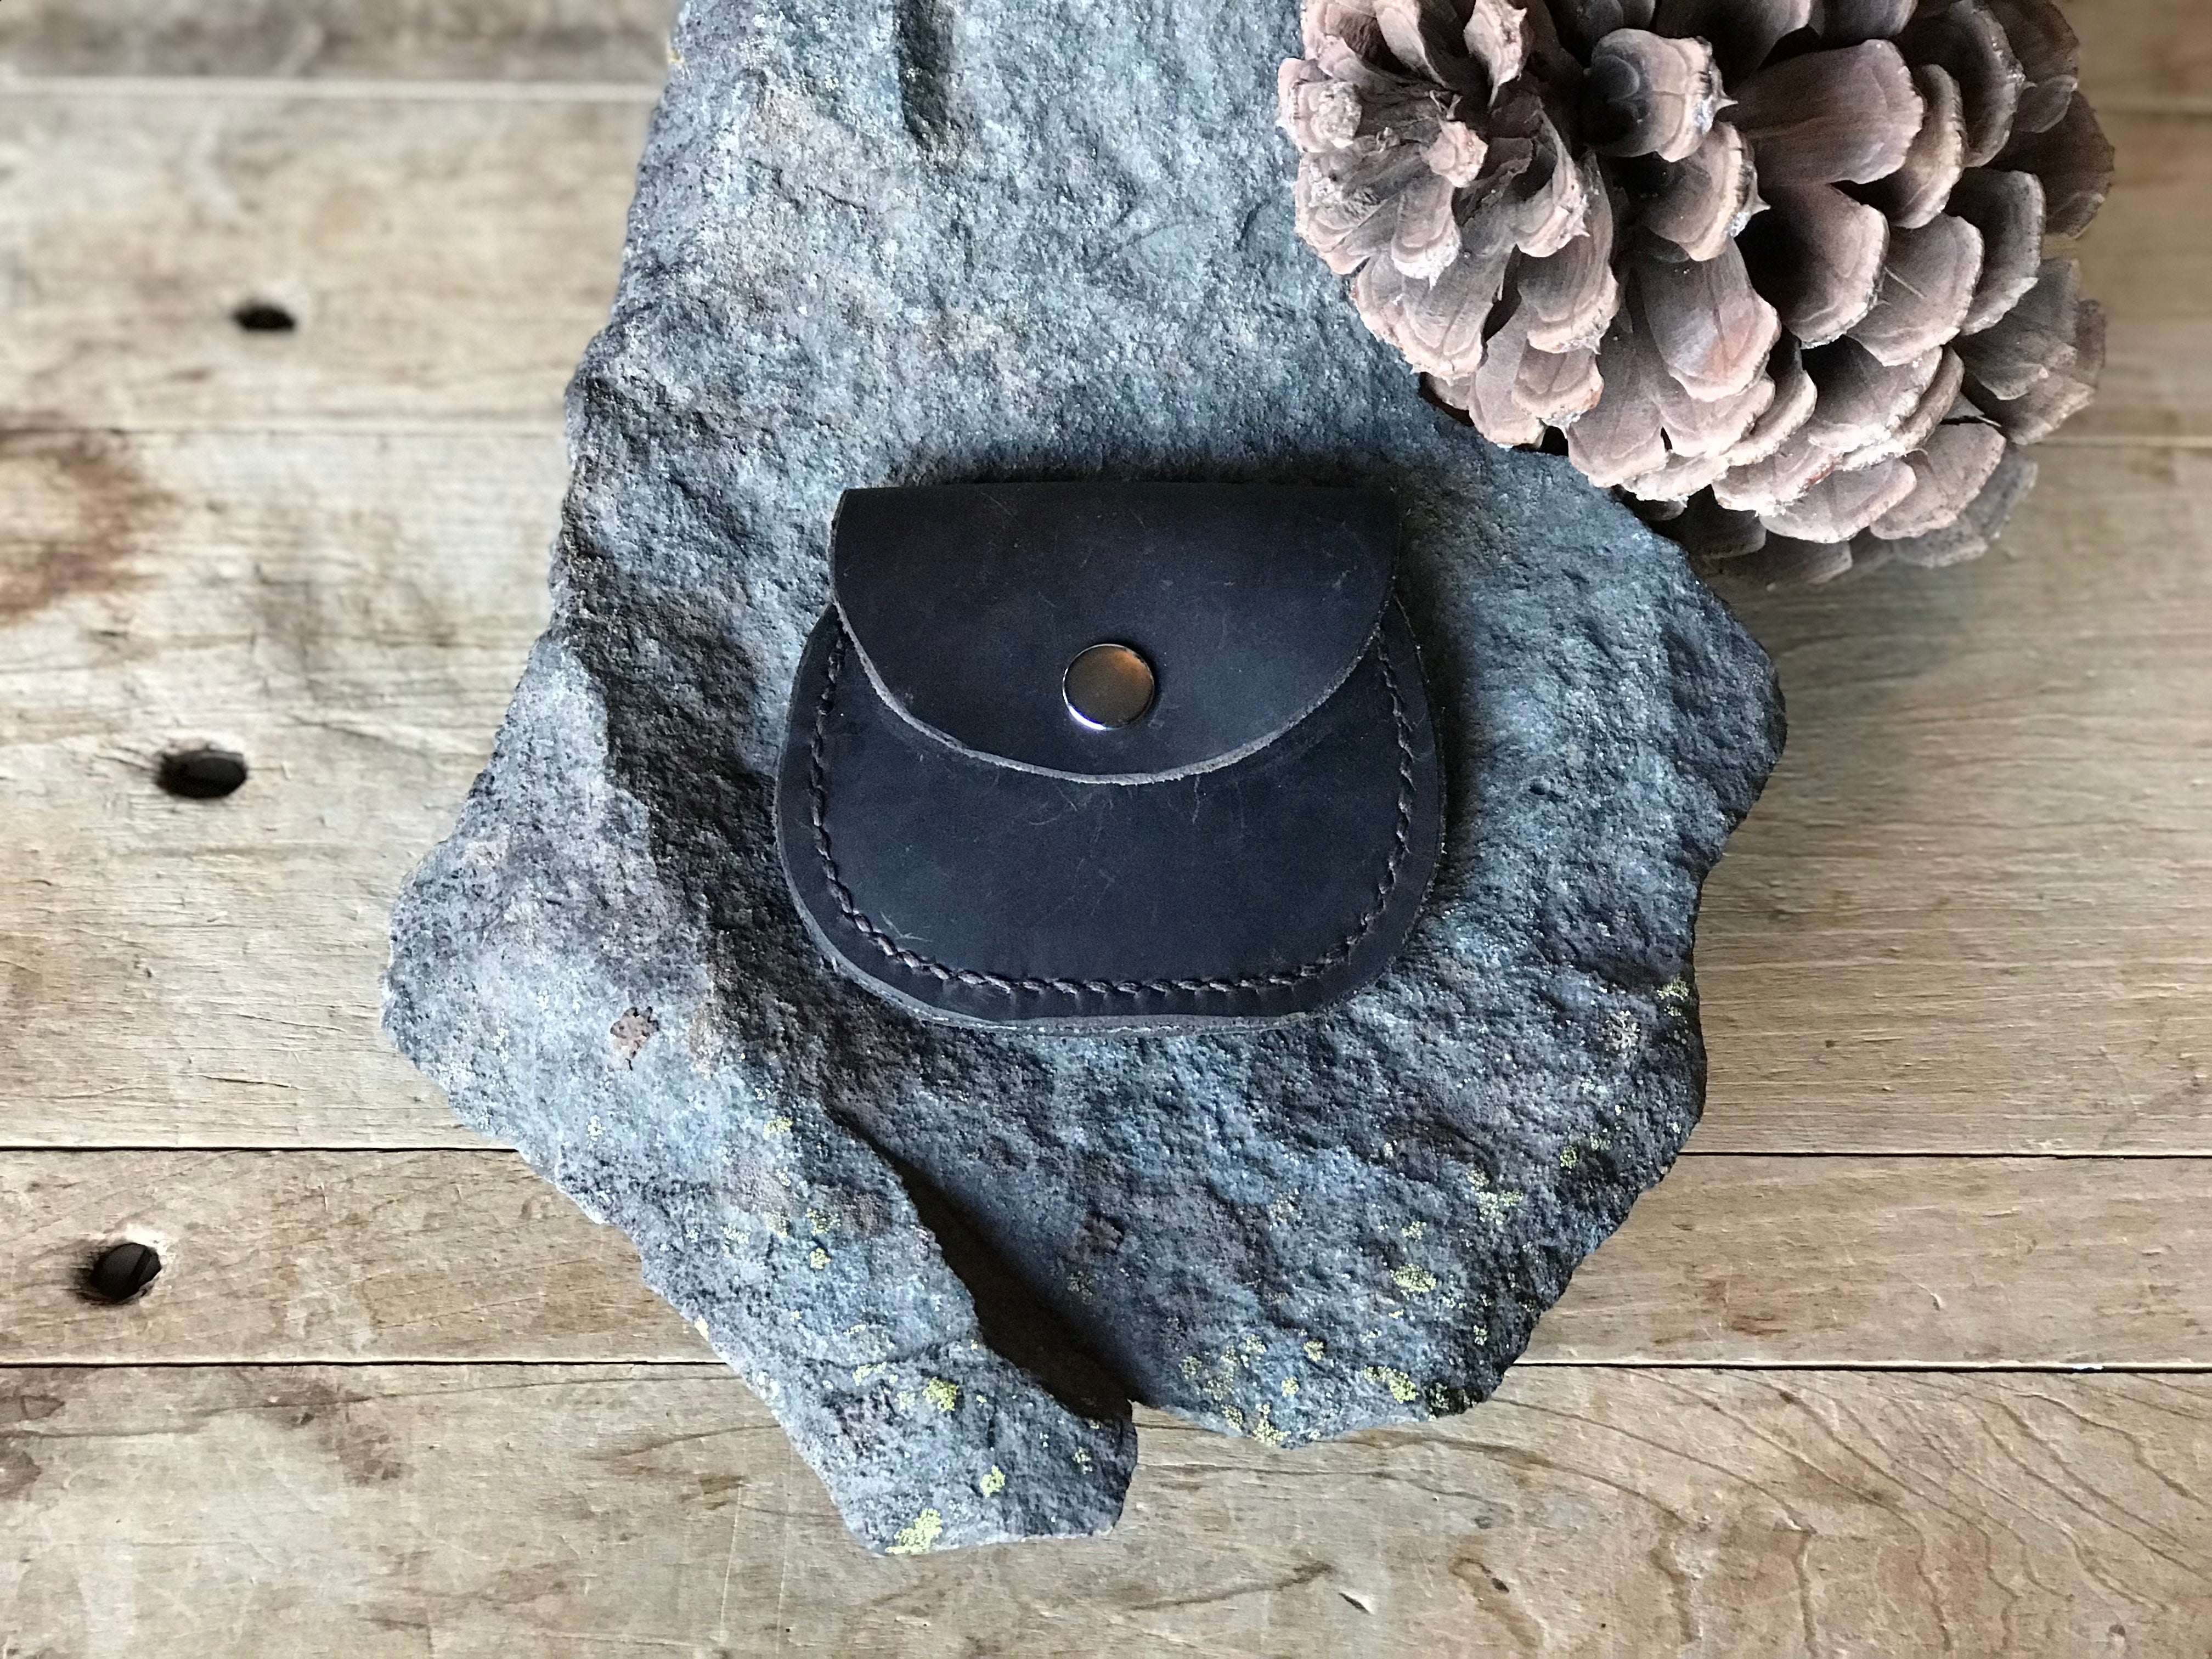 Leather Coin Holder